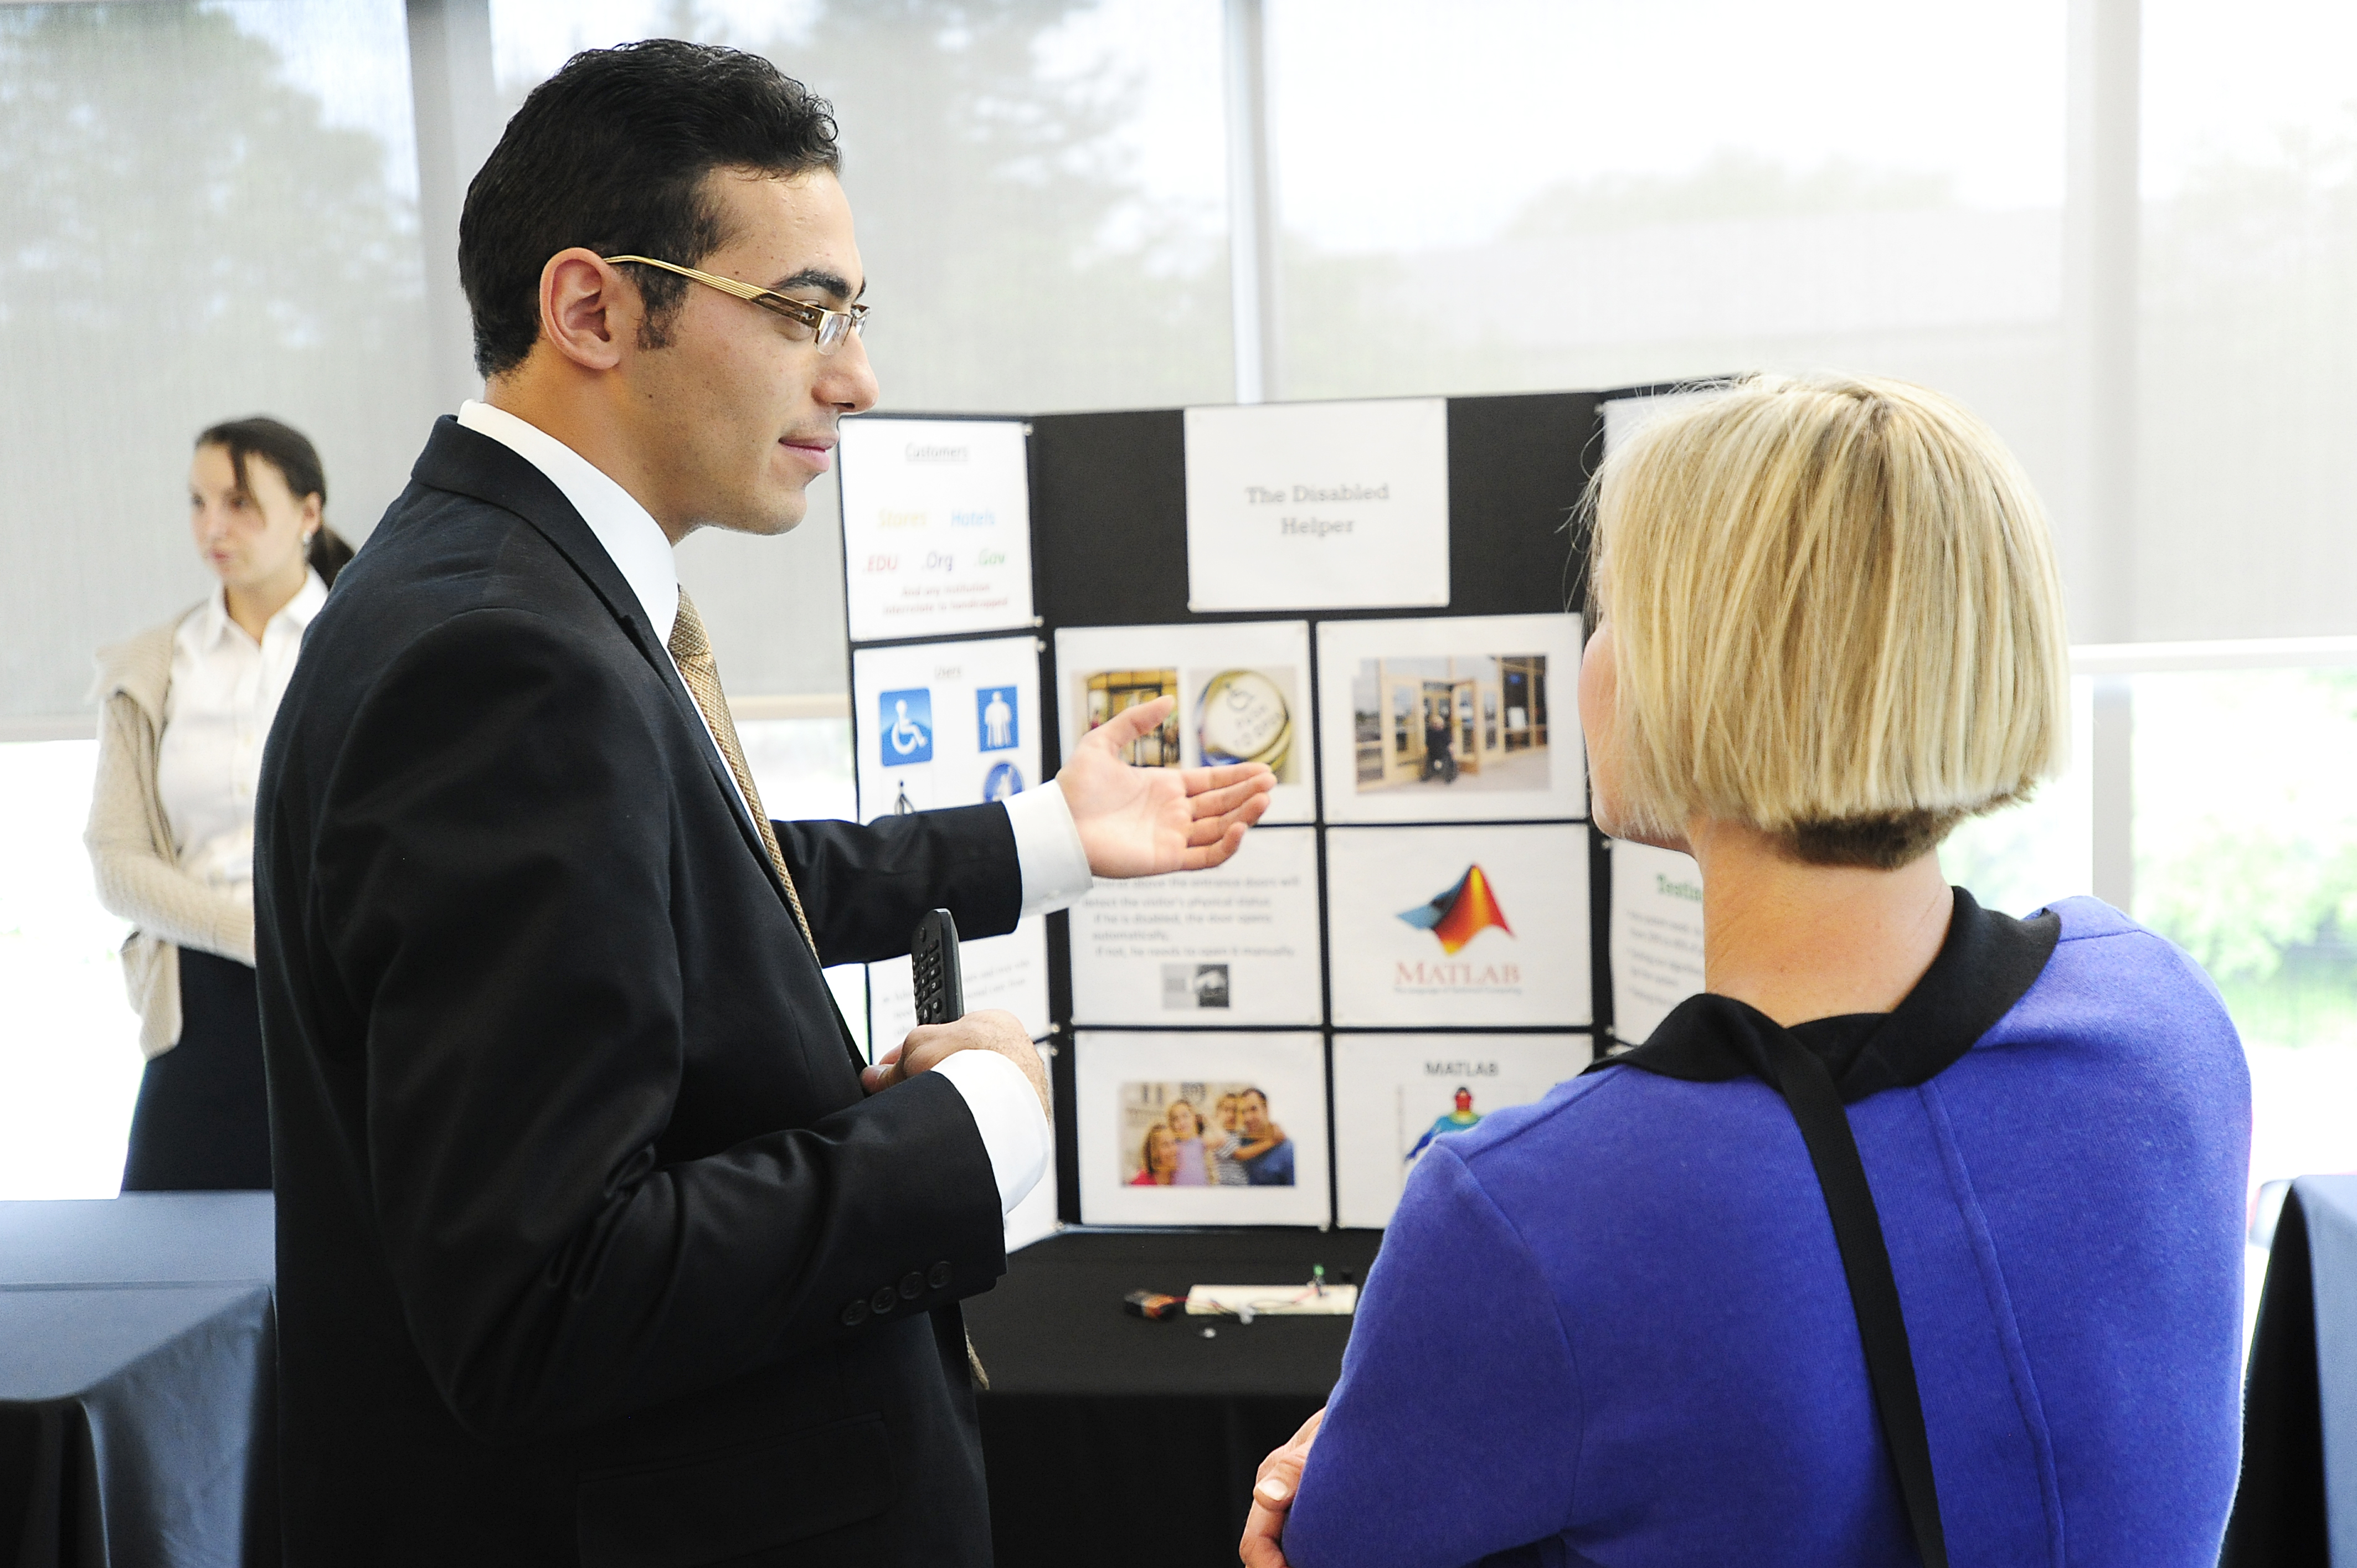 Employer with presentation talking to student